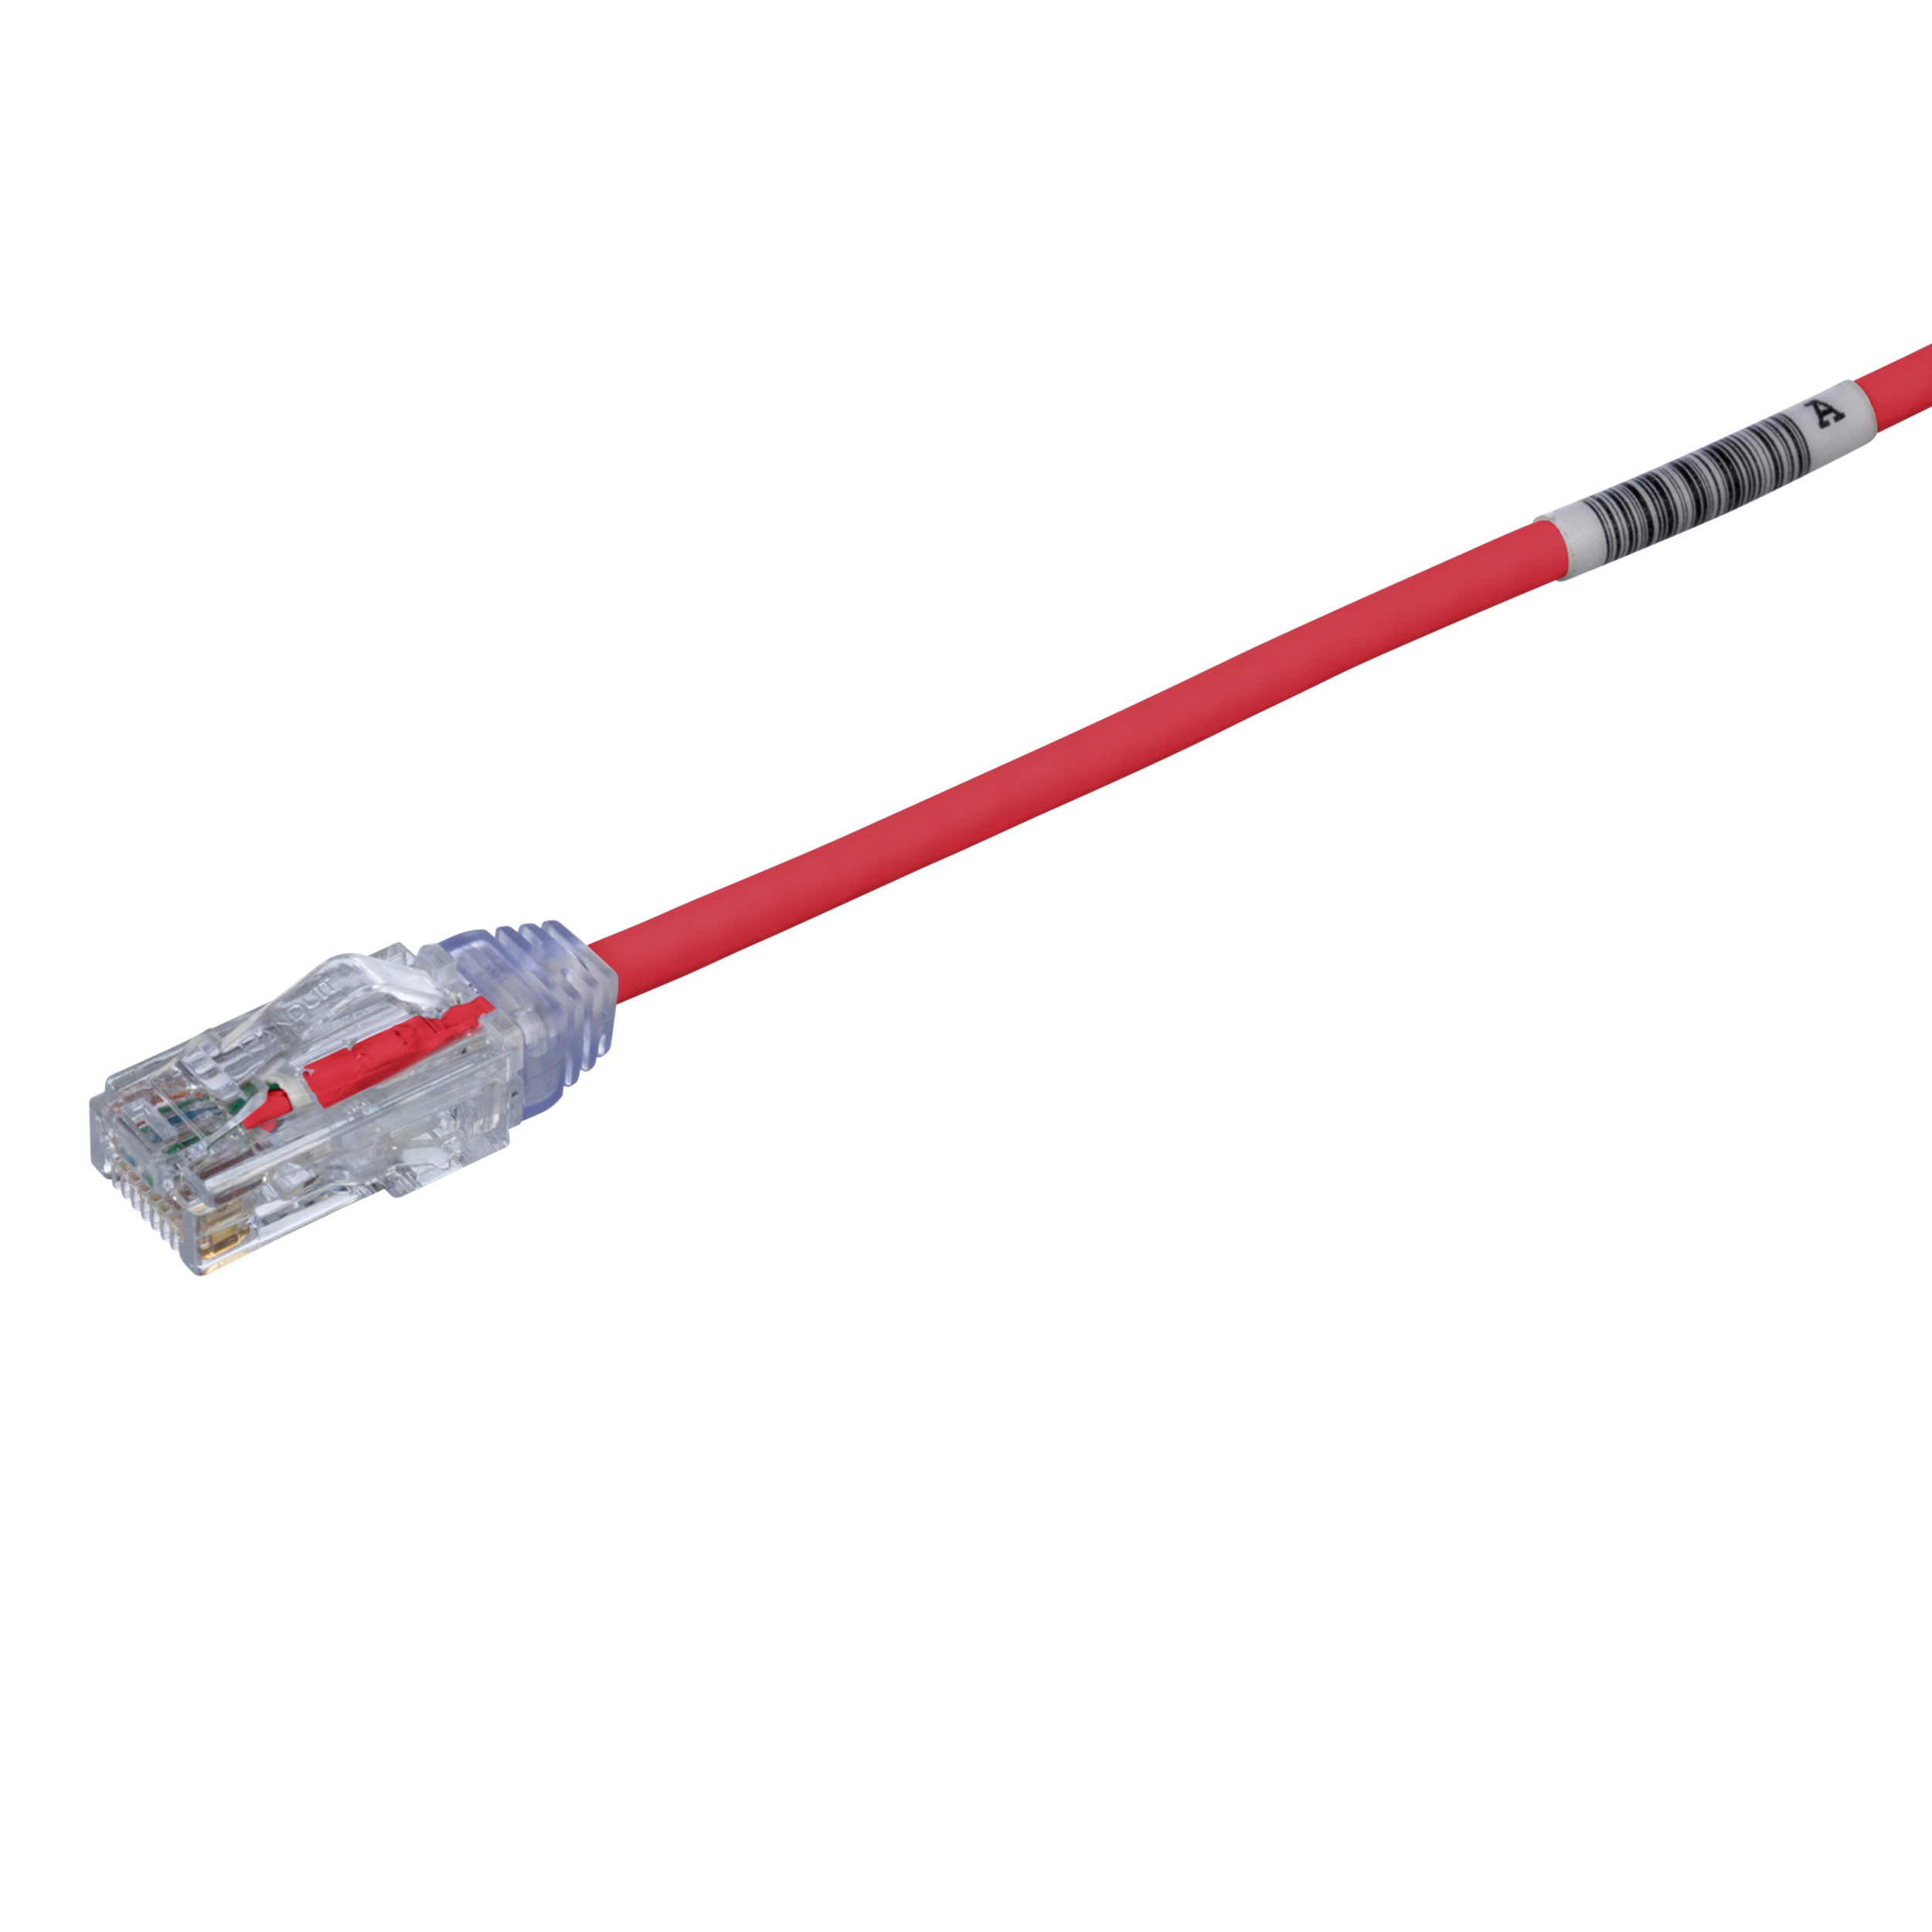 Cat 6 28 AWG UTP Copper Patch Cord, 3 ft, Red